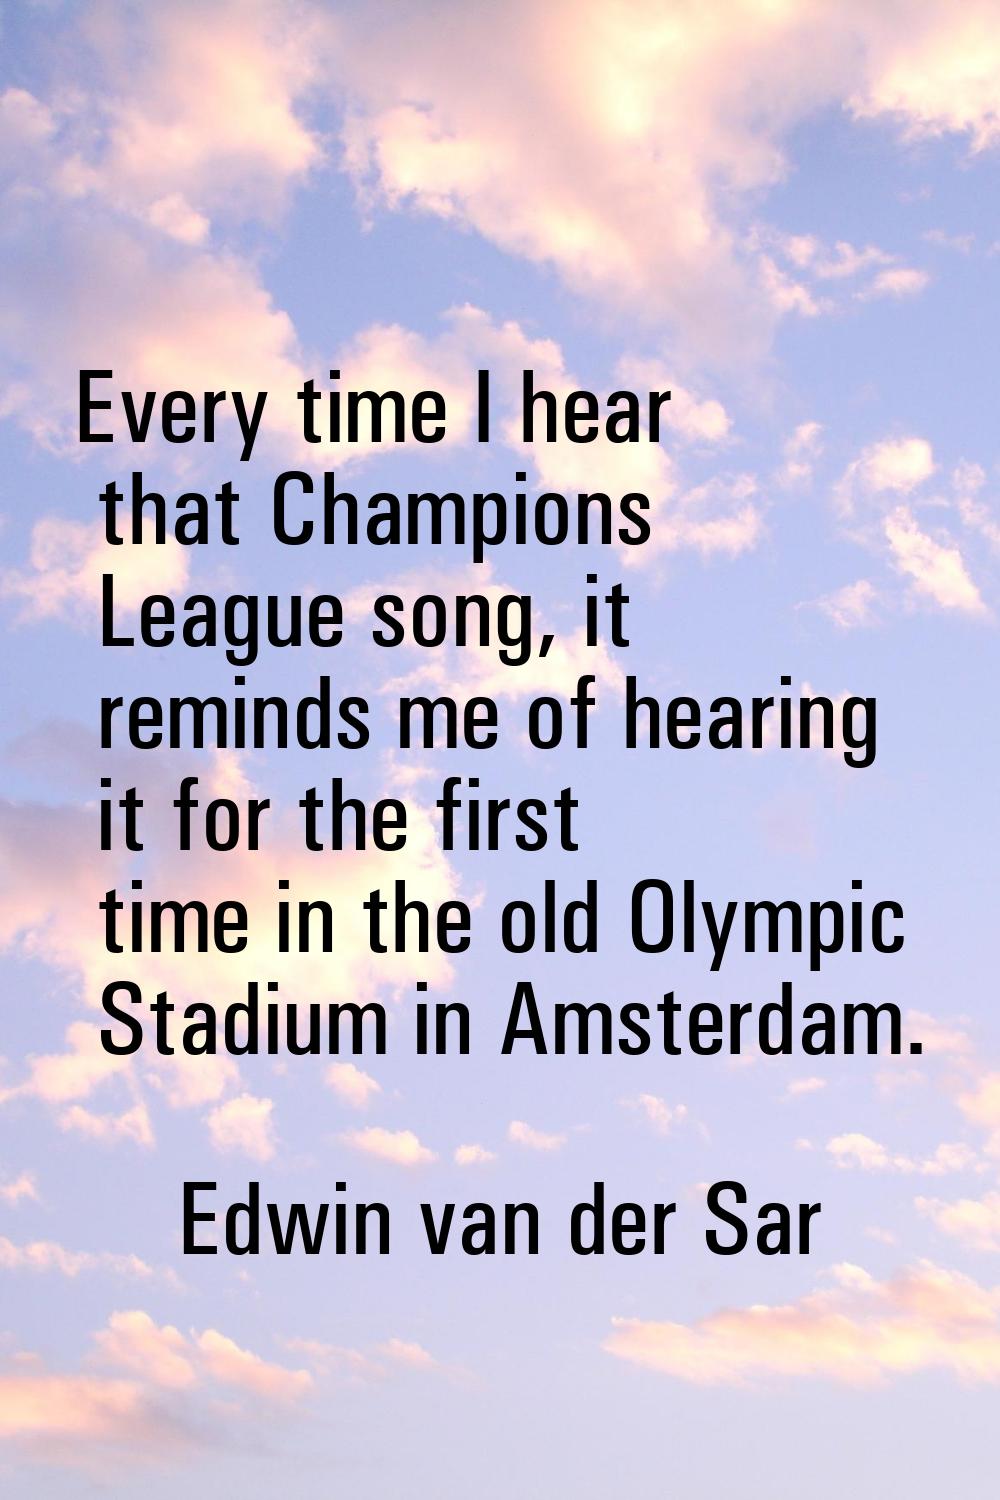 Every time I hear that Champions League song, it reminds me of hearing it for the first time in the